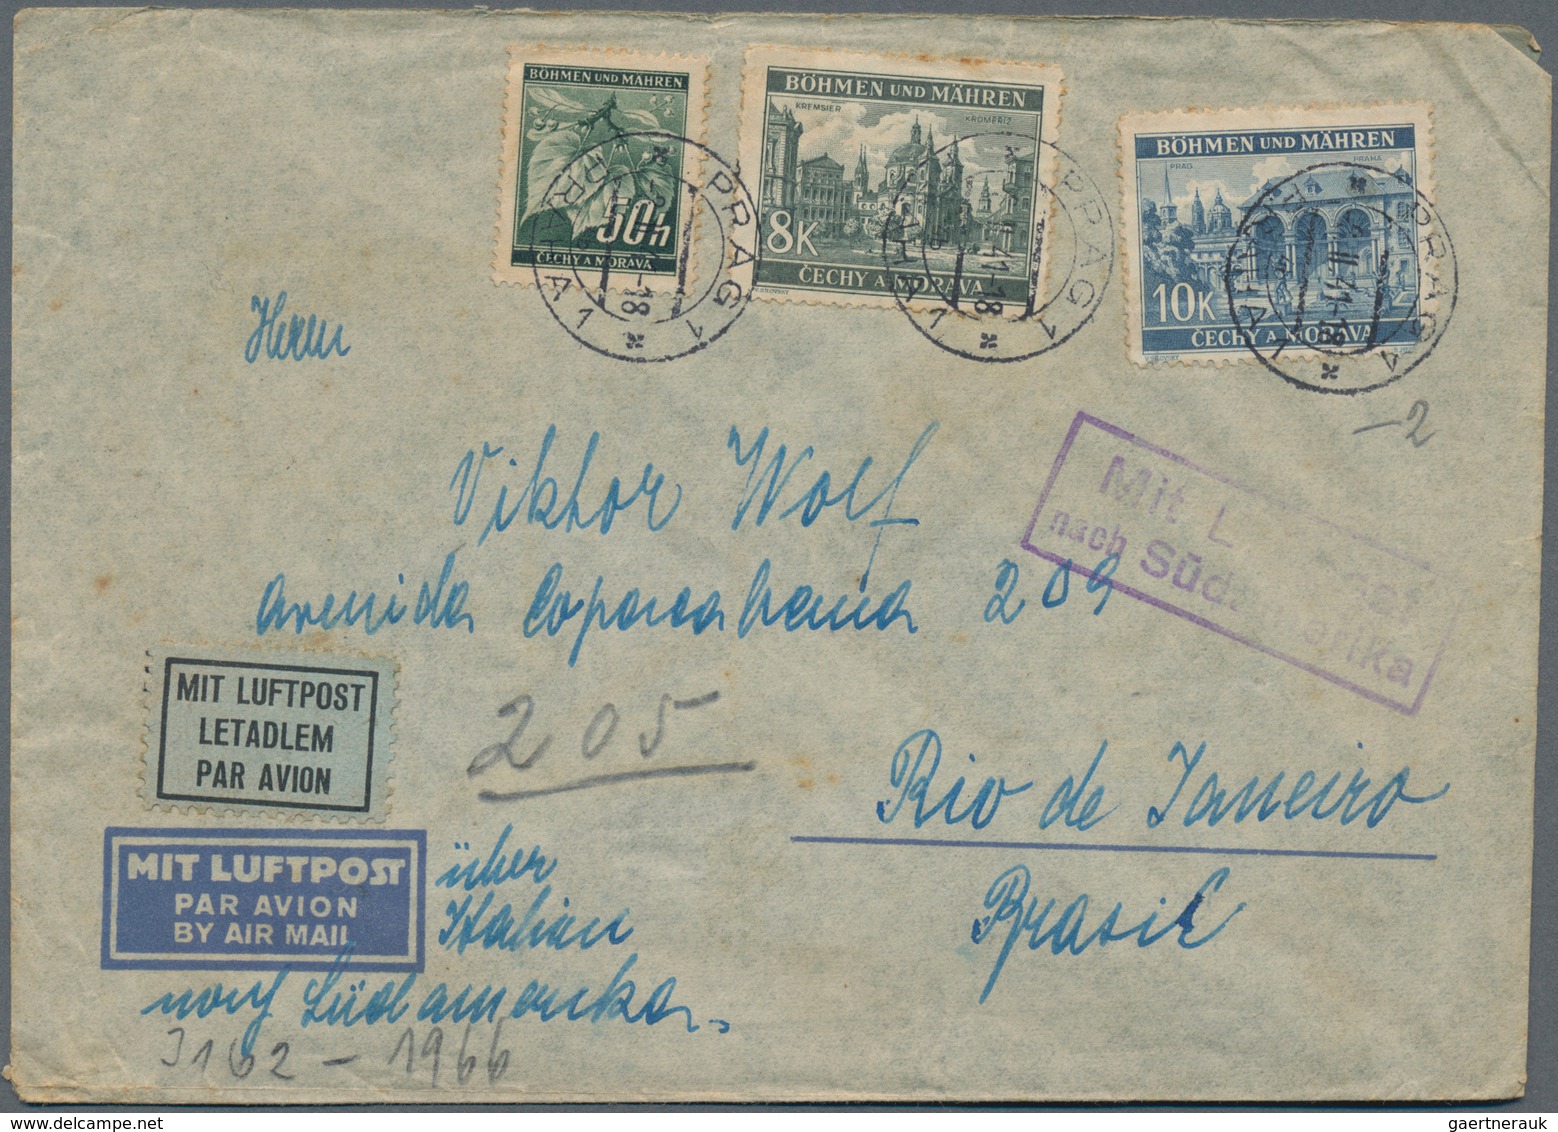 Alle Welt: 1831/1970 ca., comprehensive lot with ca.260 worldwide covers, cards and stationeries (so